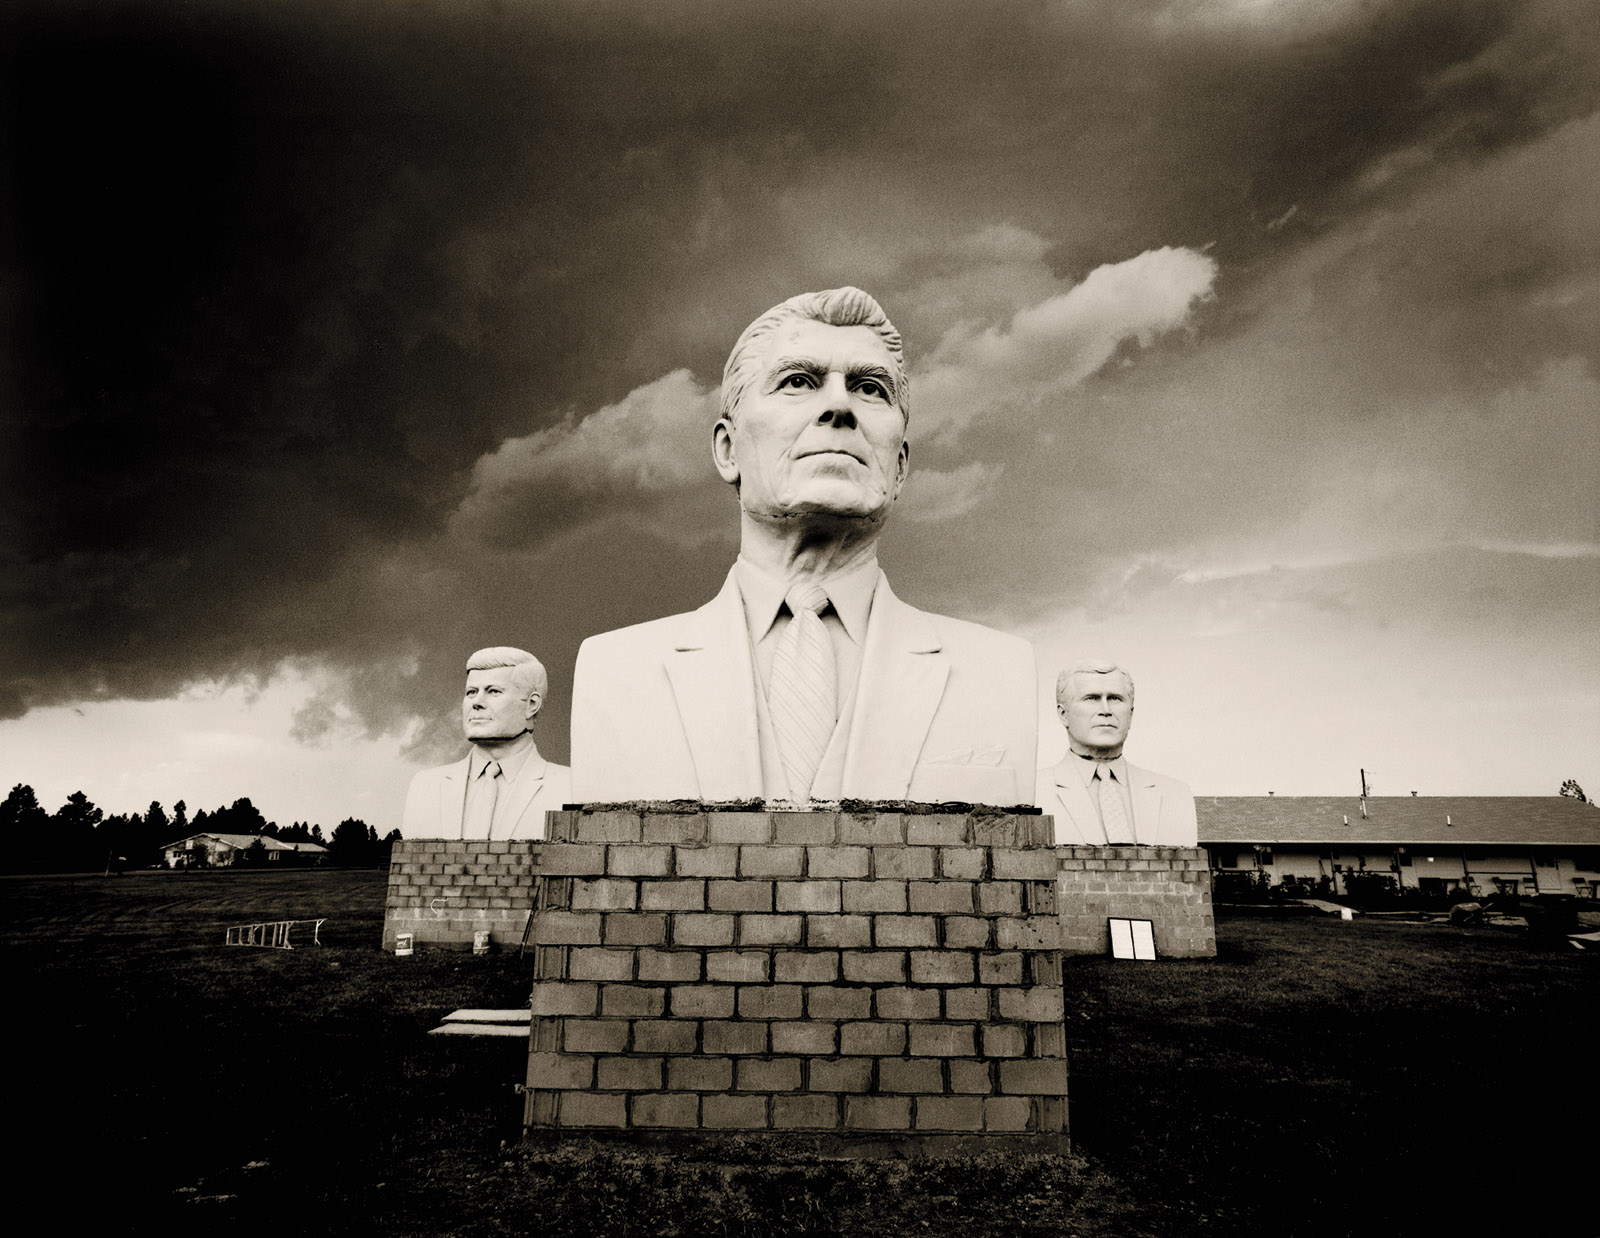 ‘Presidents,’ South Dakota, 2005; photograph by Jack Spencer from his book This Land: An American Portrait. It includes a foreword by Jon Meacham and is published by University of Texas Press.